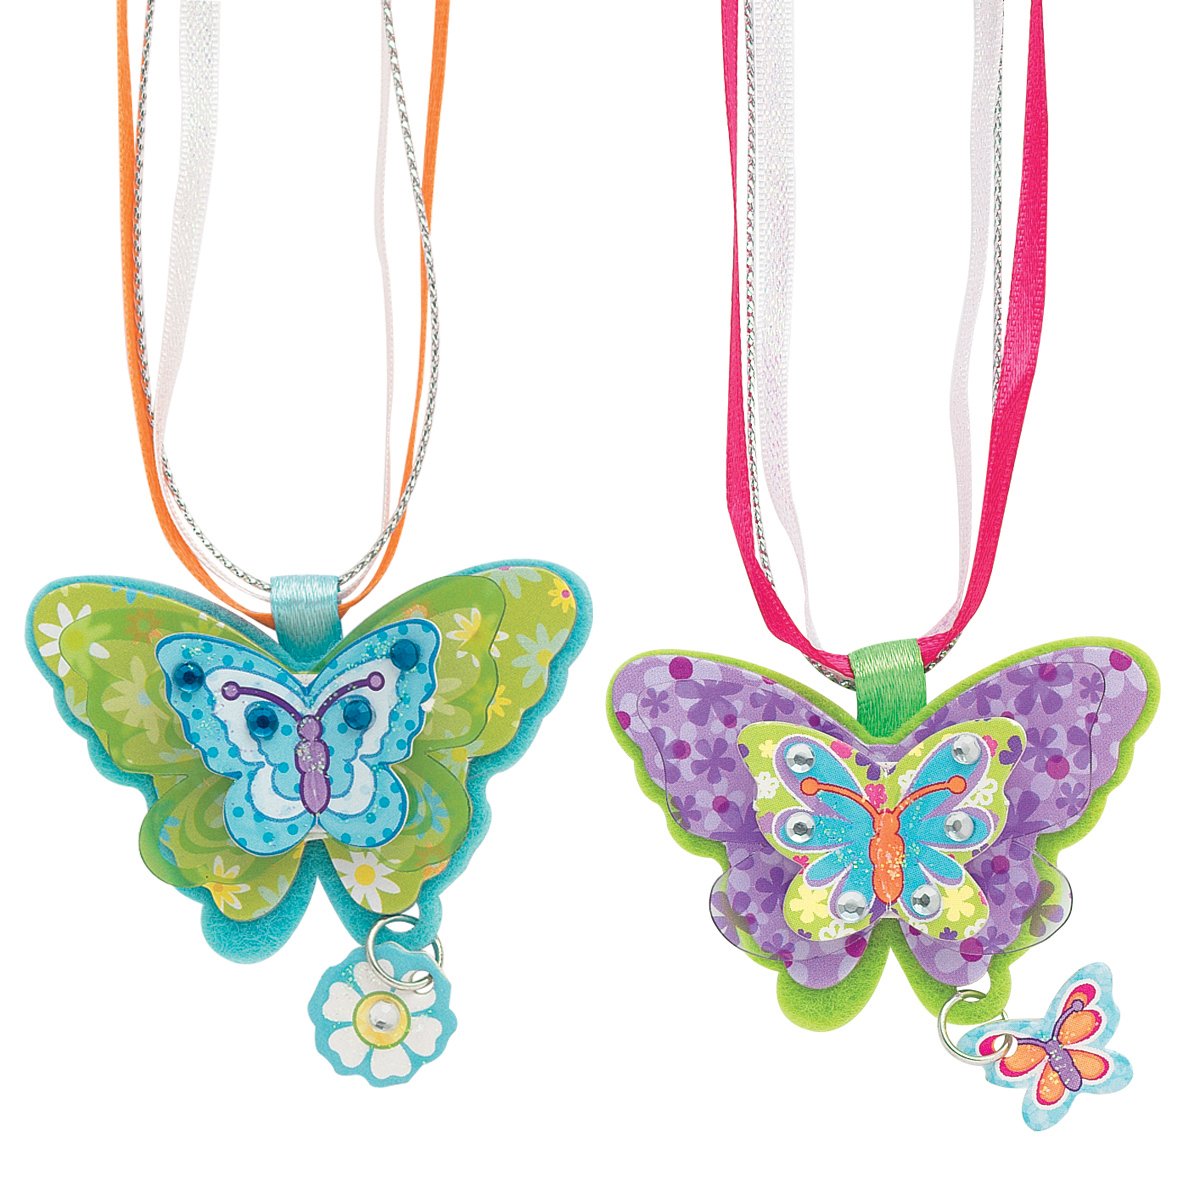 Creativity for Kids Butterfly Necklaces - Children's Jewelry Making Craft Kit - Makes 6 Necklaces